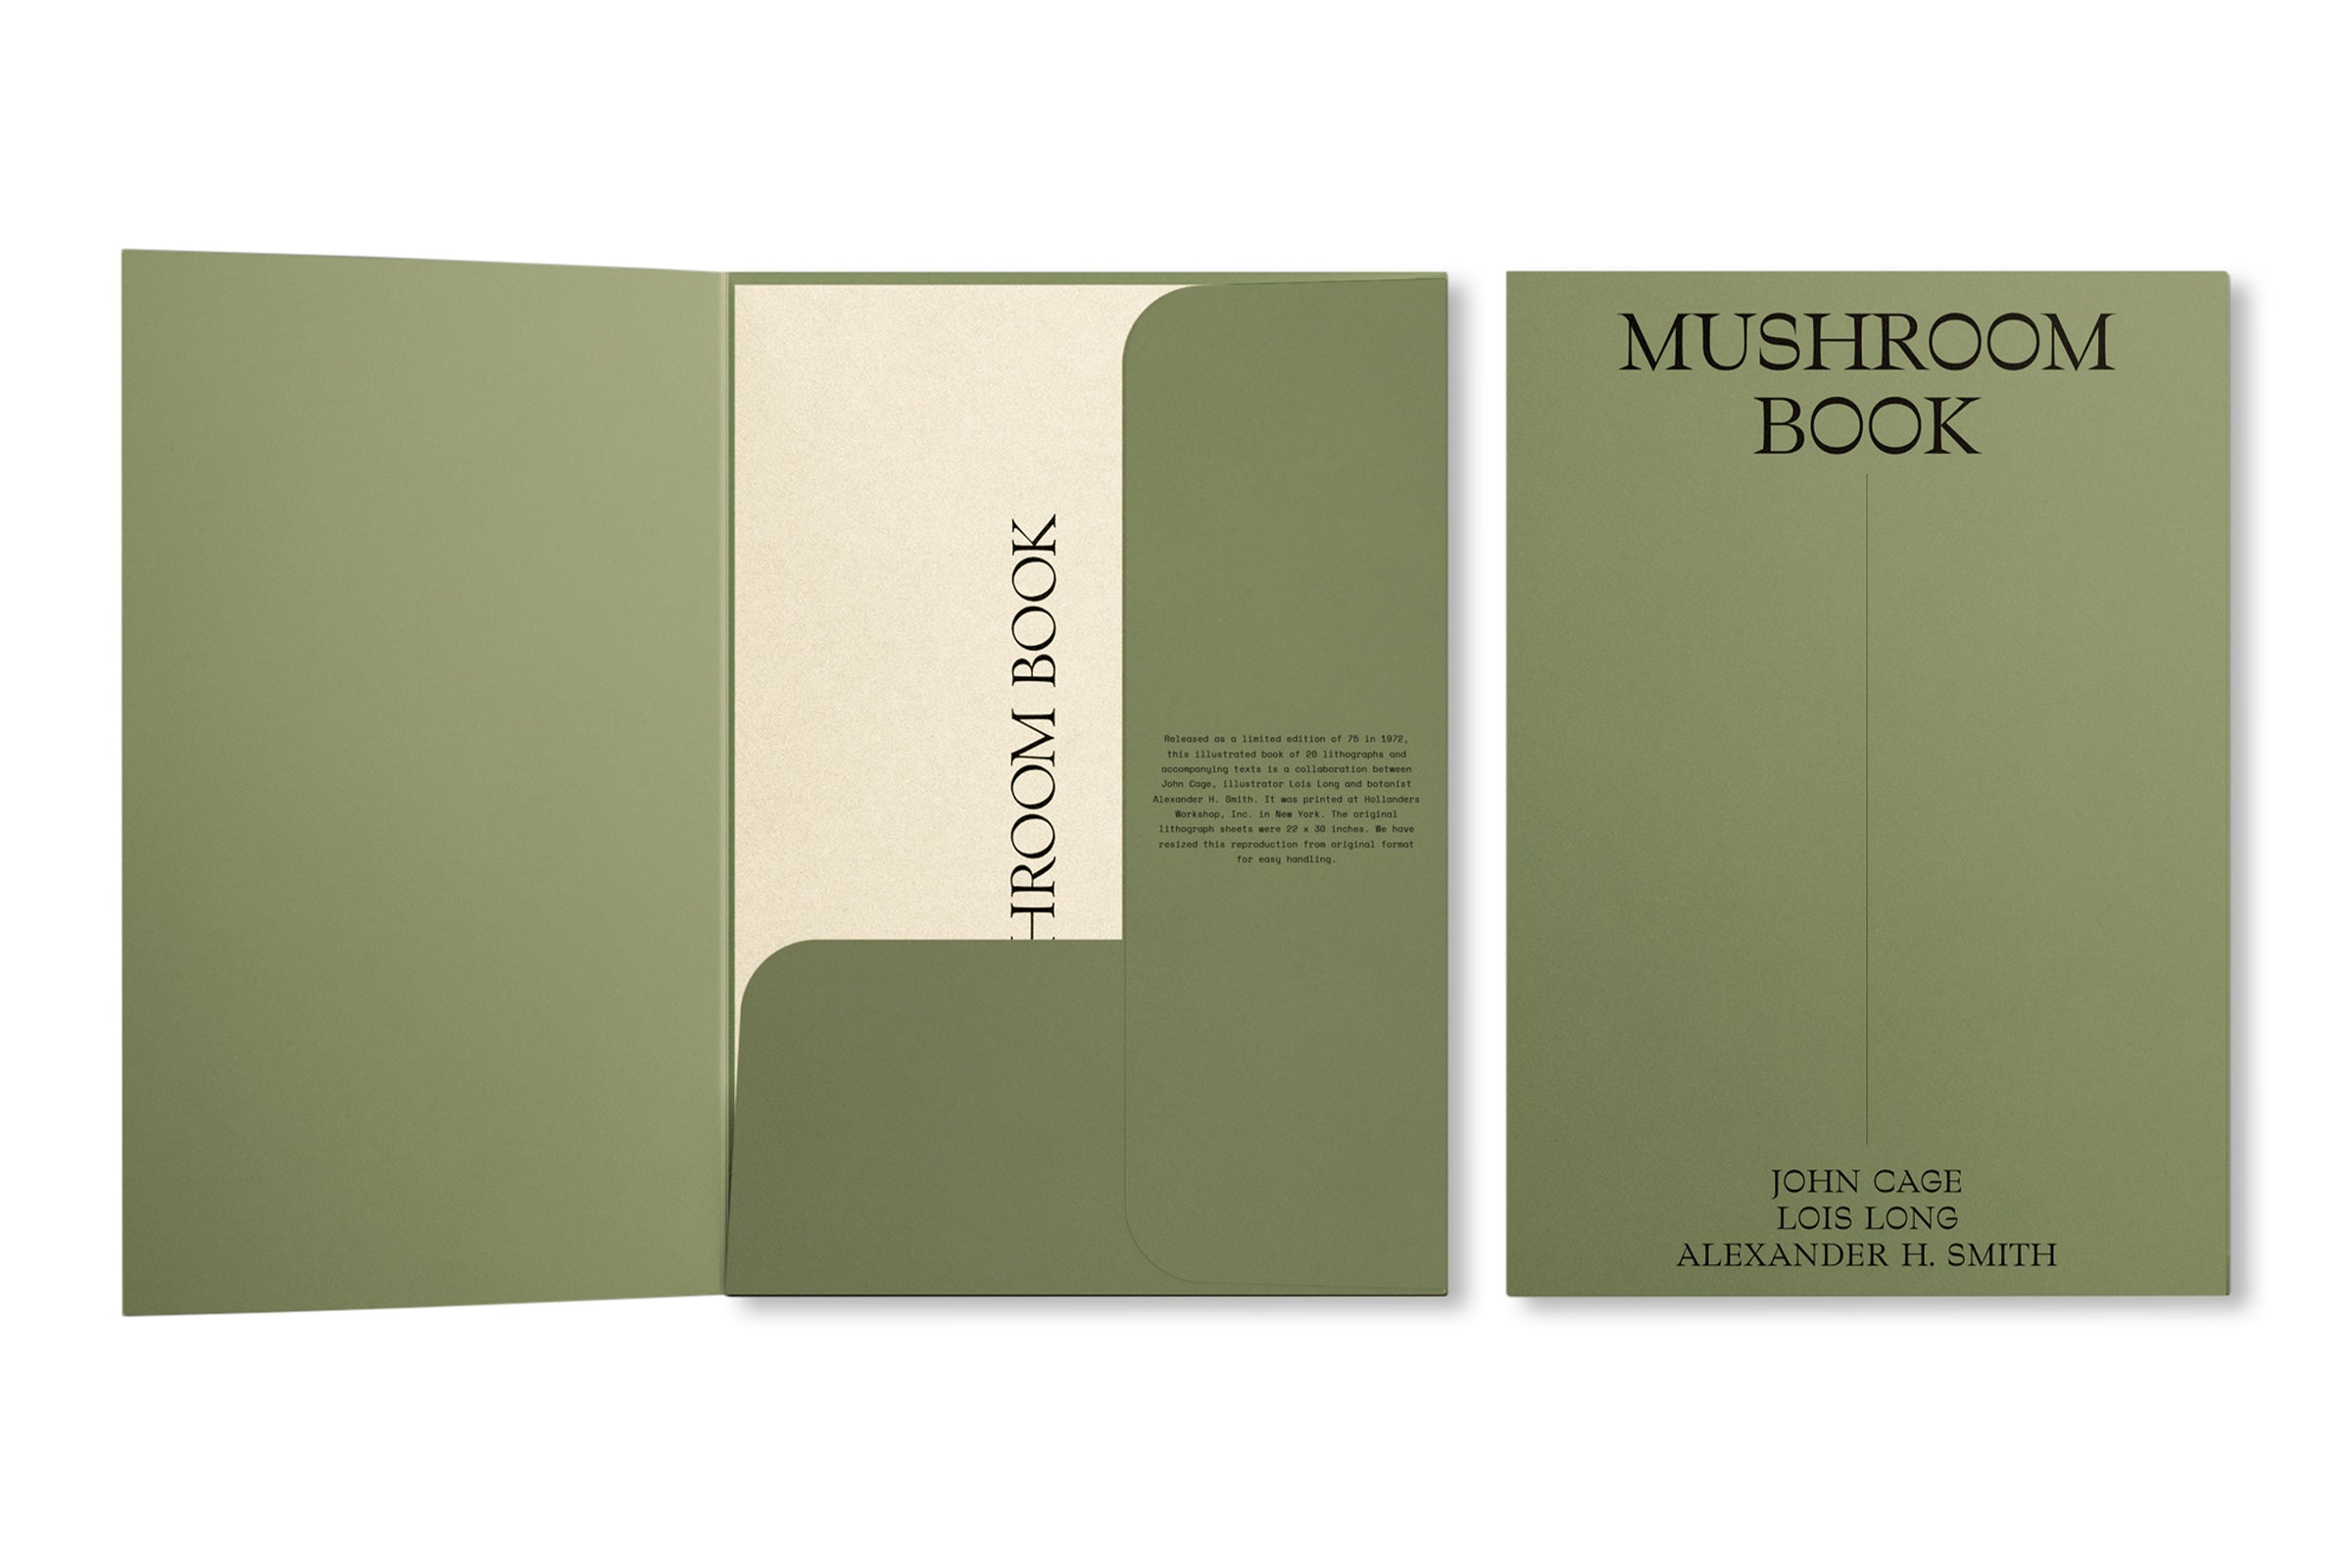 A MYCOLOGICAL FORAY by John Cage [THIRD EDITION]